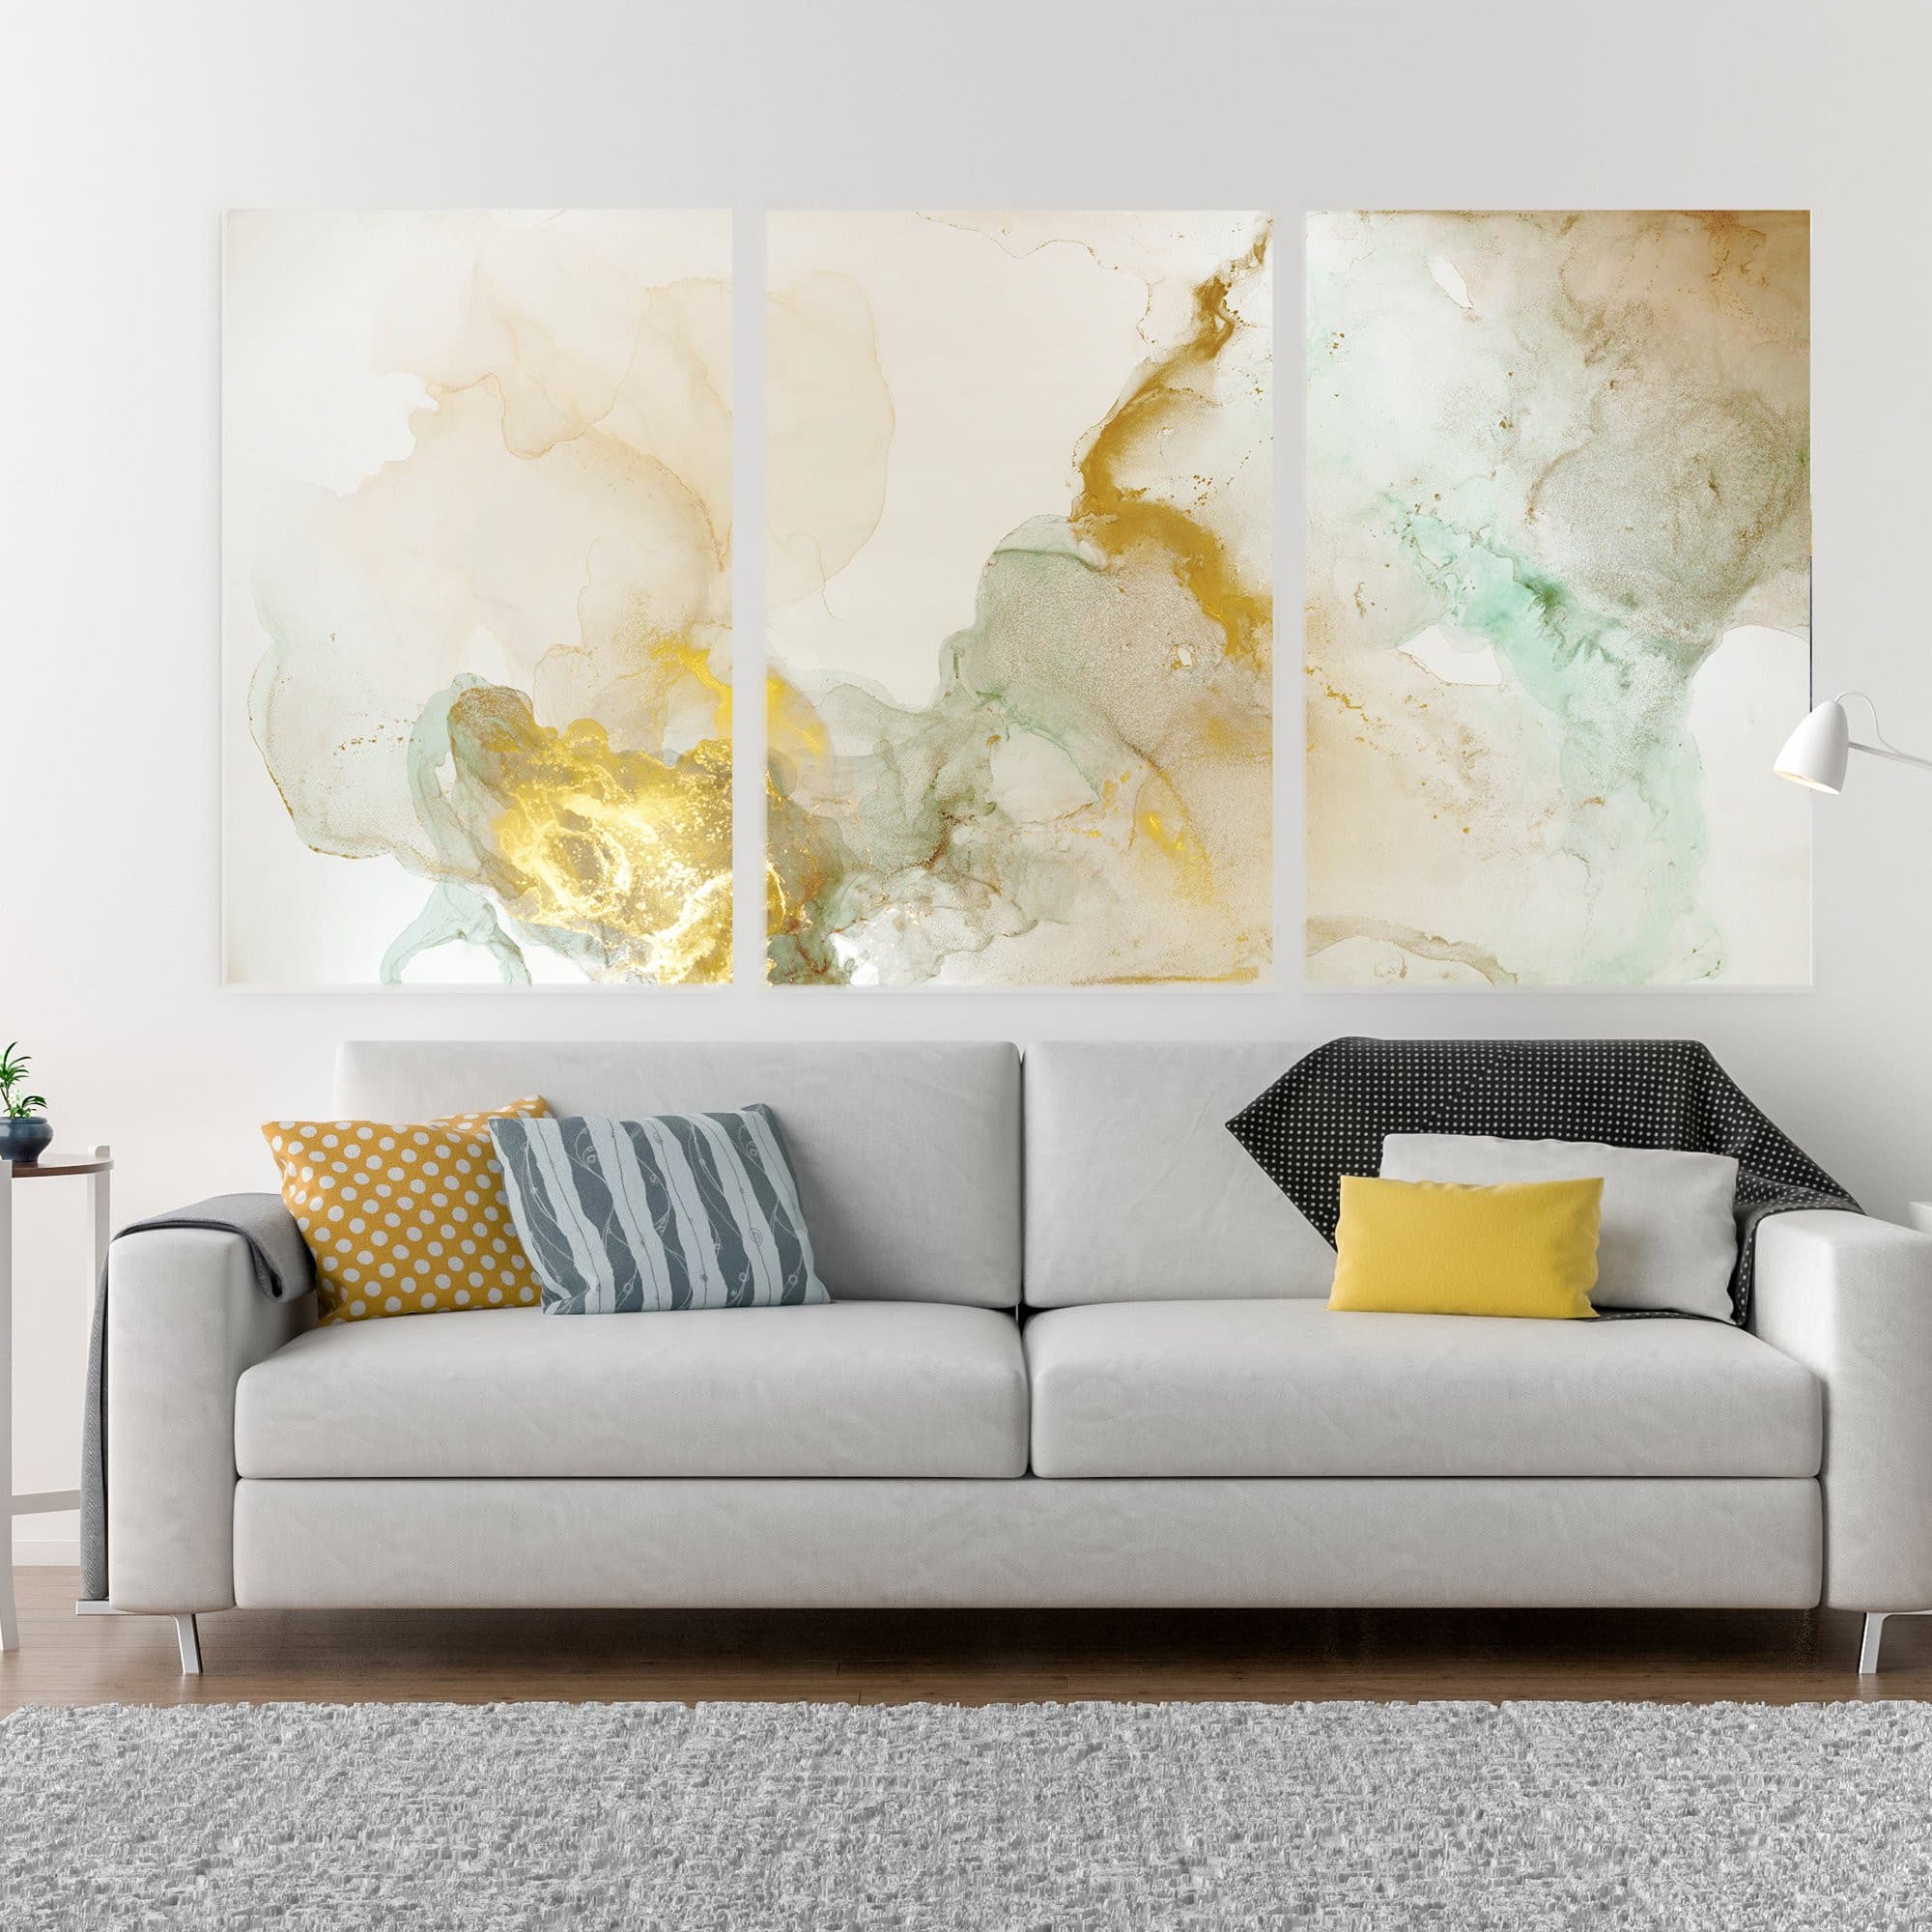 Wall Pictures Canvas - Motiv-art